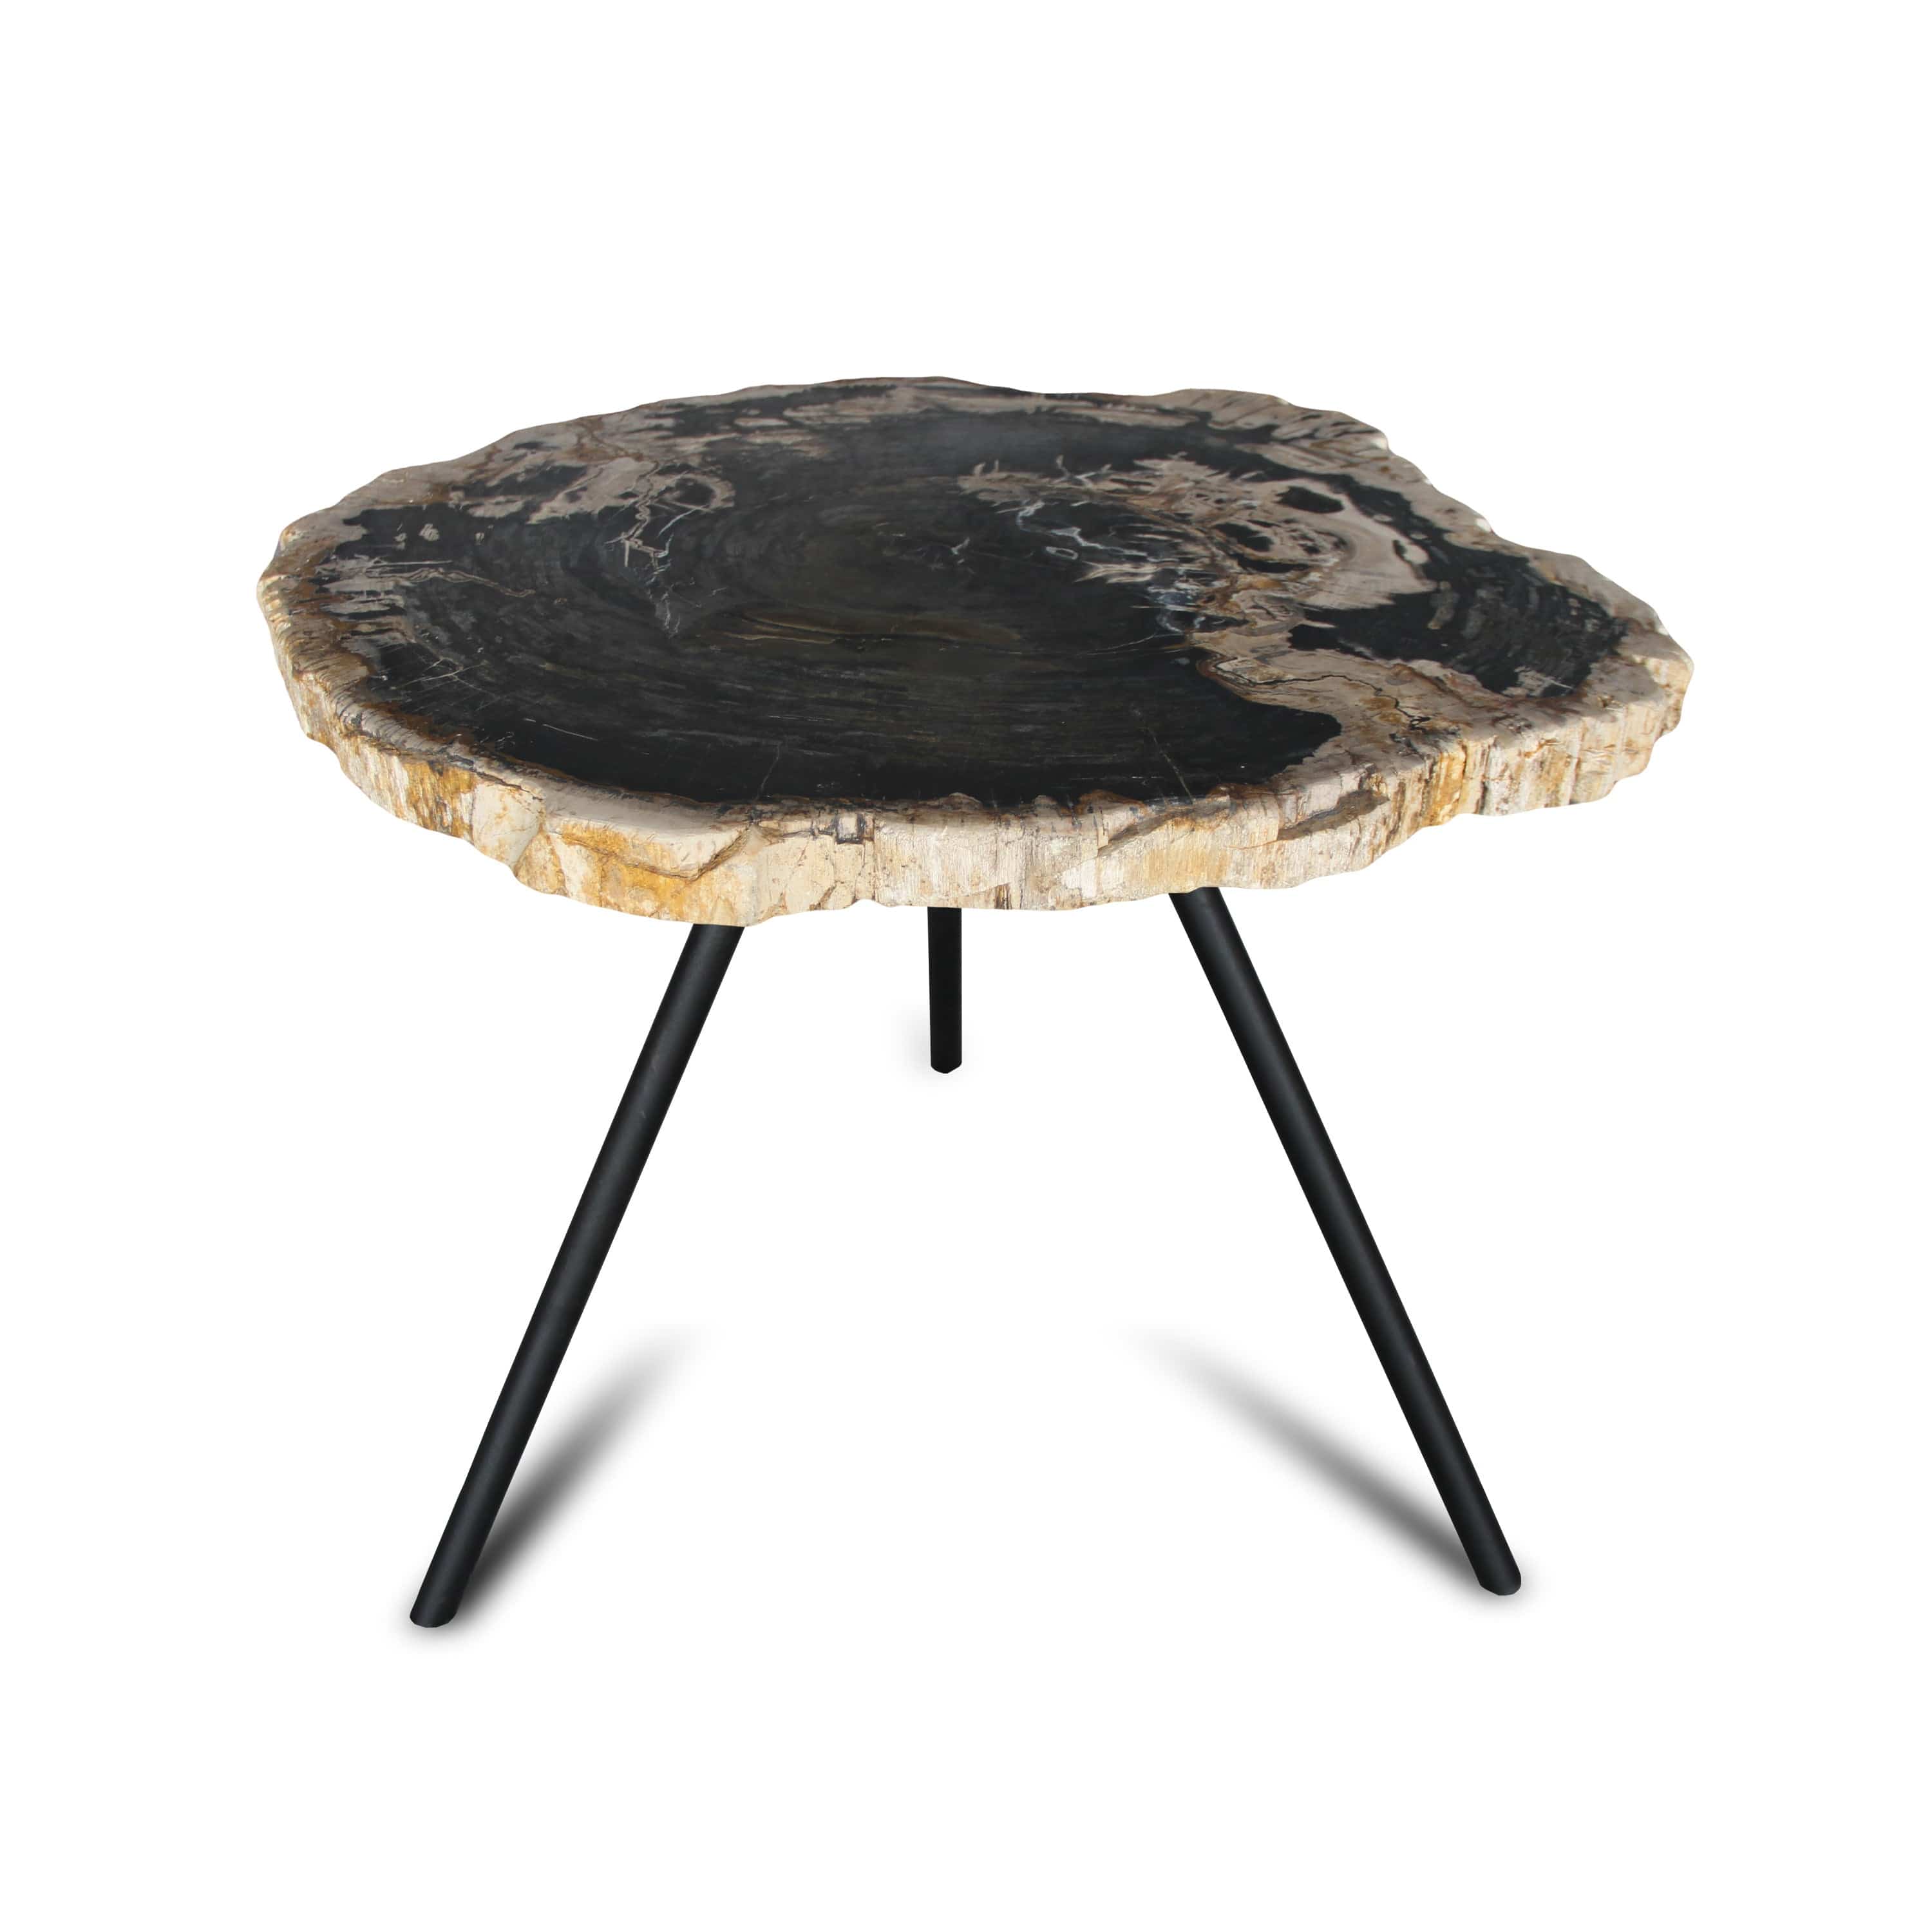 Kalifano Petrified Wood Petrified Wood Round Slice Side Table from Indonesia - 30" / 84 lbs PWT3200.003